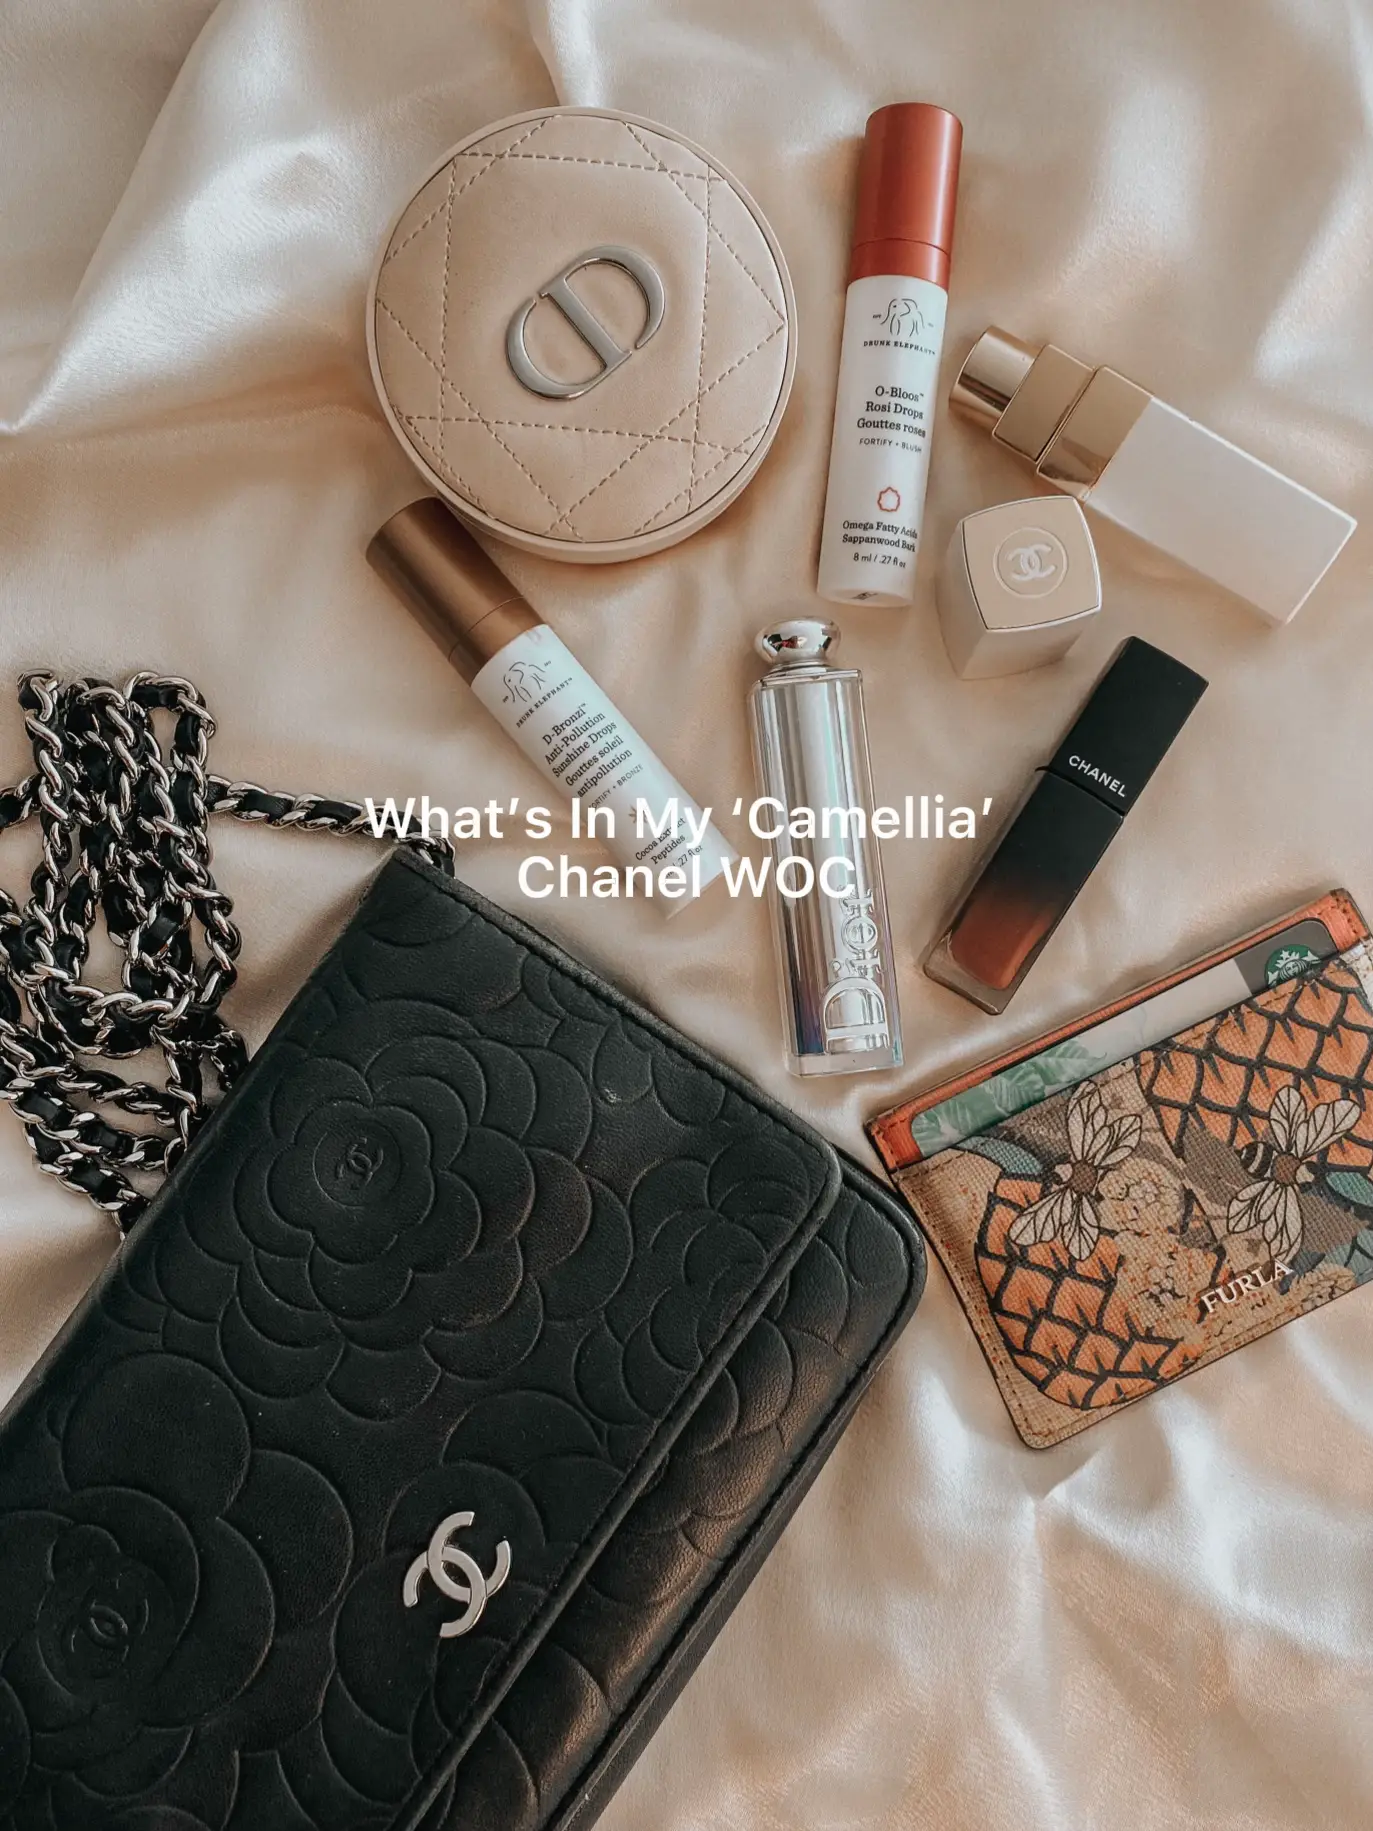 What's in my Camellia Chanel WOC, Gallery posted by AishRhmn